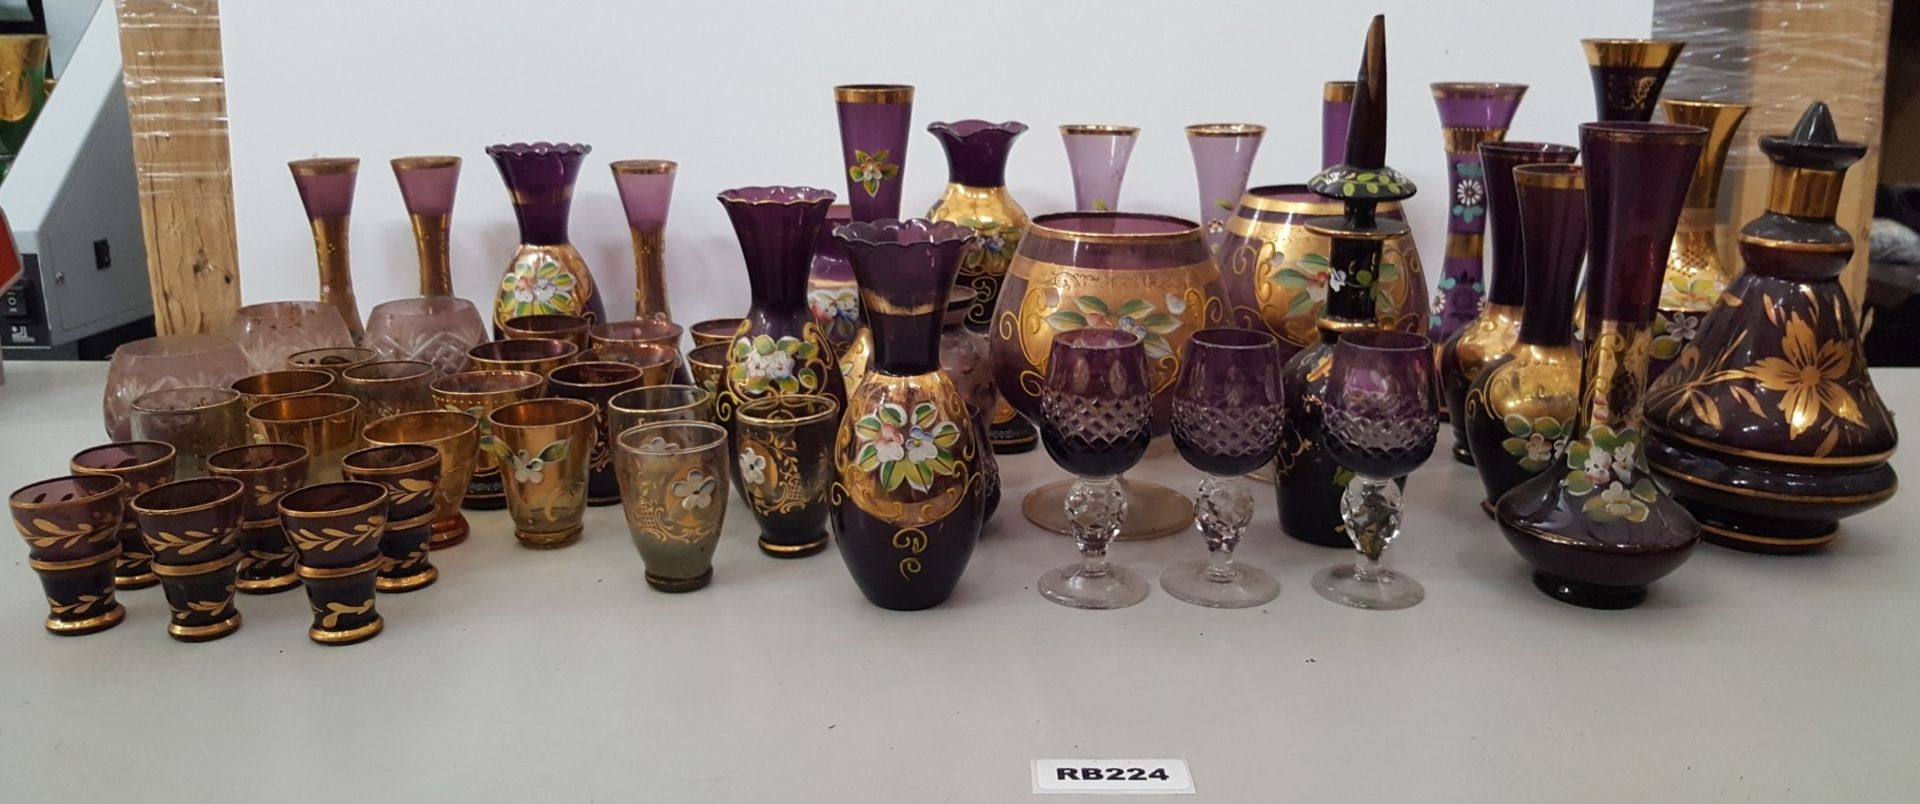 1 x Joblot Of 45+ Pieces Of Vintage Glasswear - Ref RB224 I - Image 2 of 6